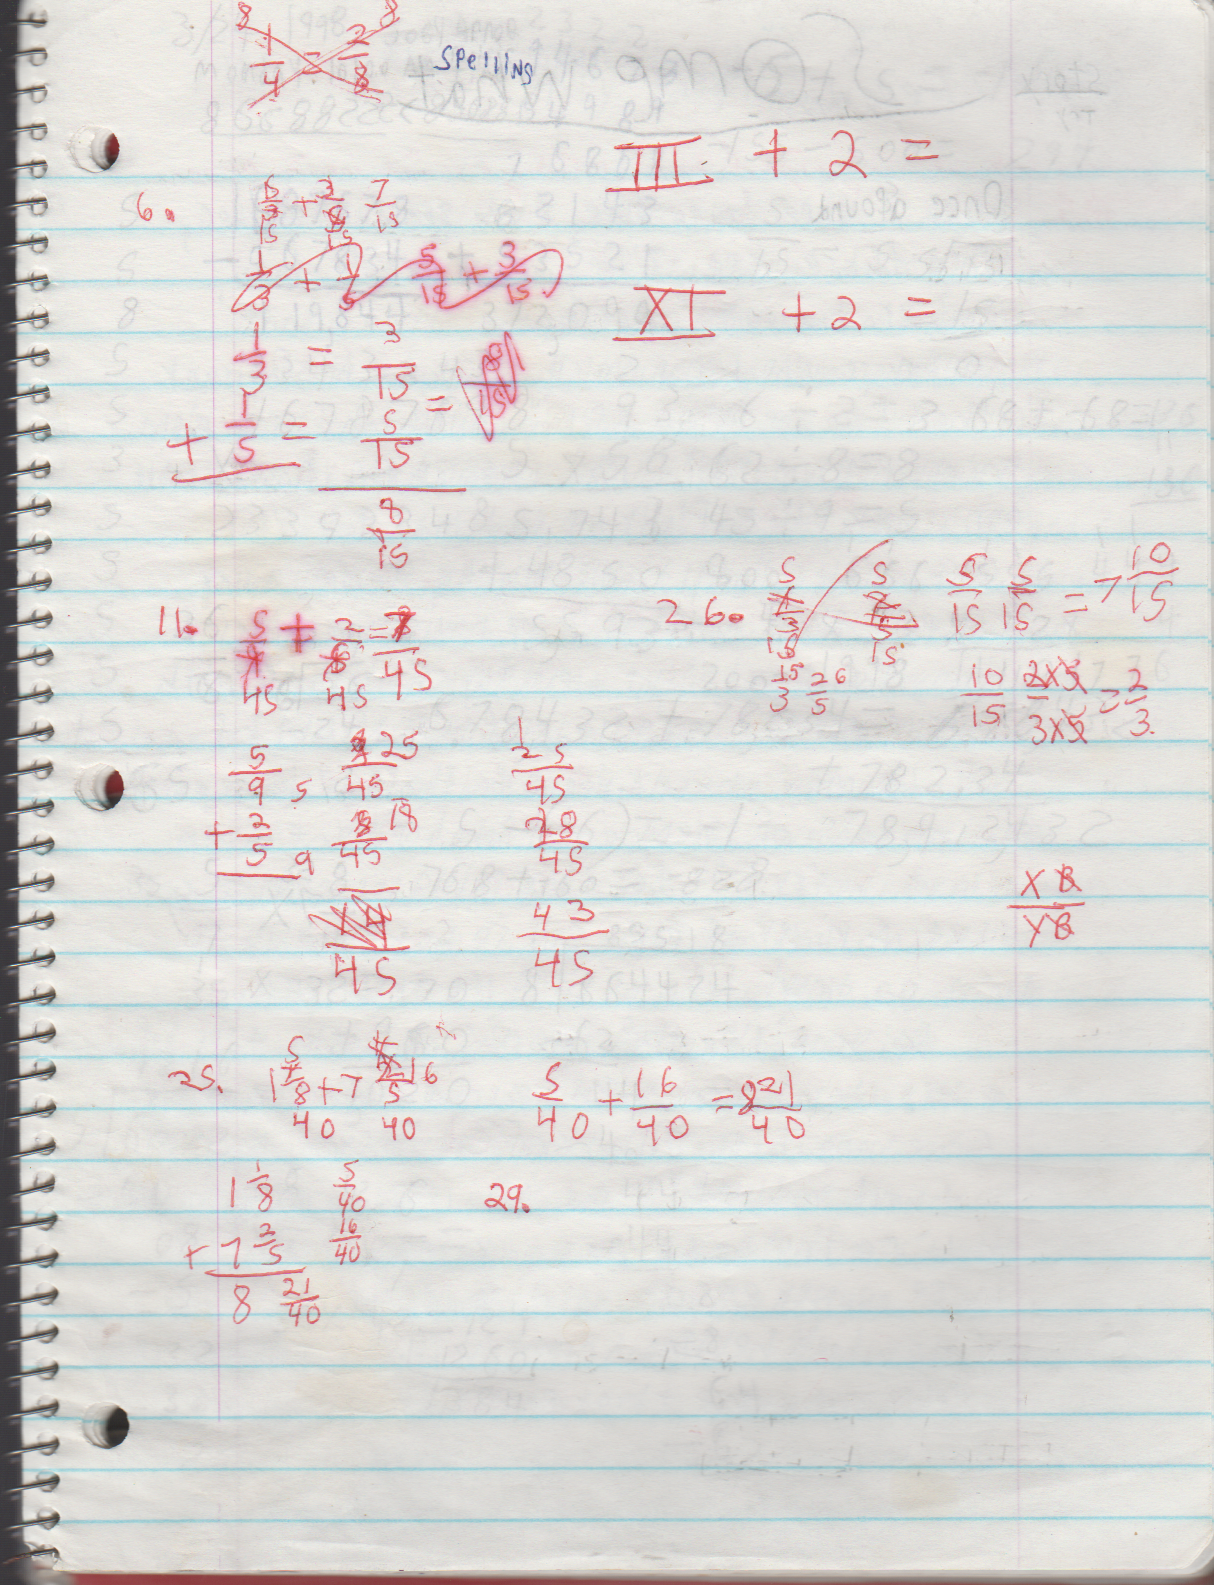 1996-08-18 - Saturday - 11 yr old Joey Arnold's School Book, dates through to 1998 apx, mostly 96, Writings, Drawings, Etc-043.png